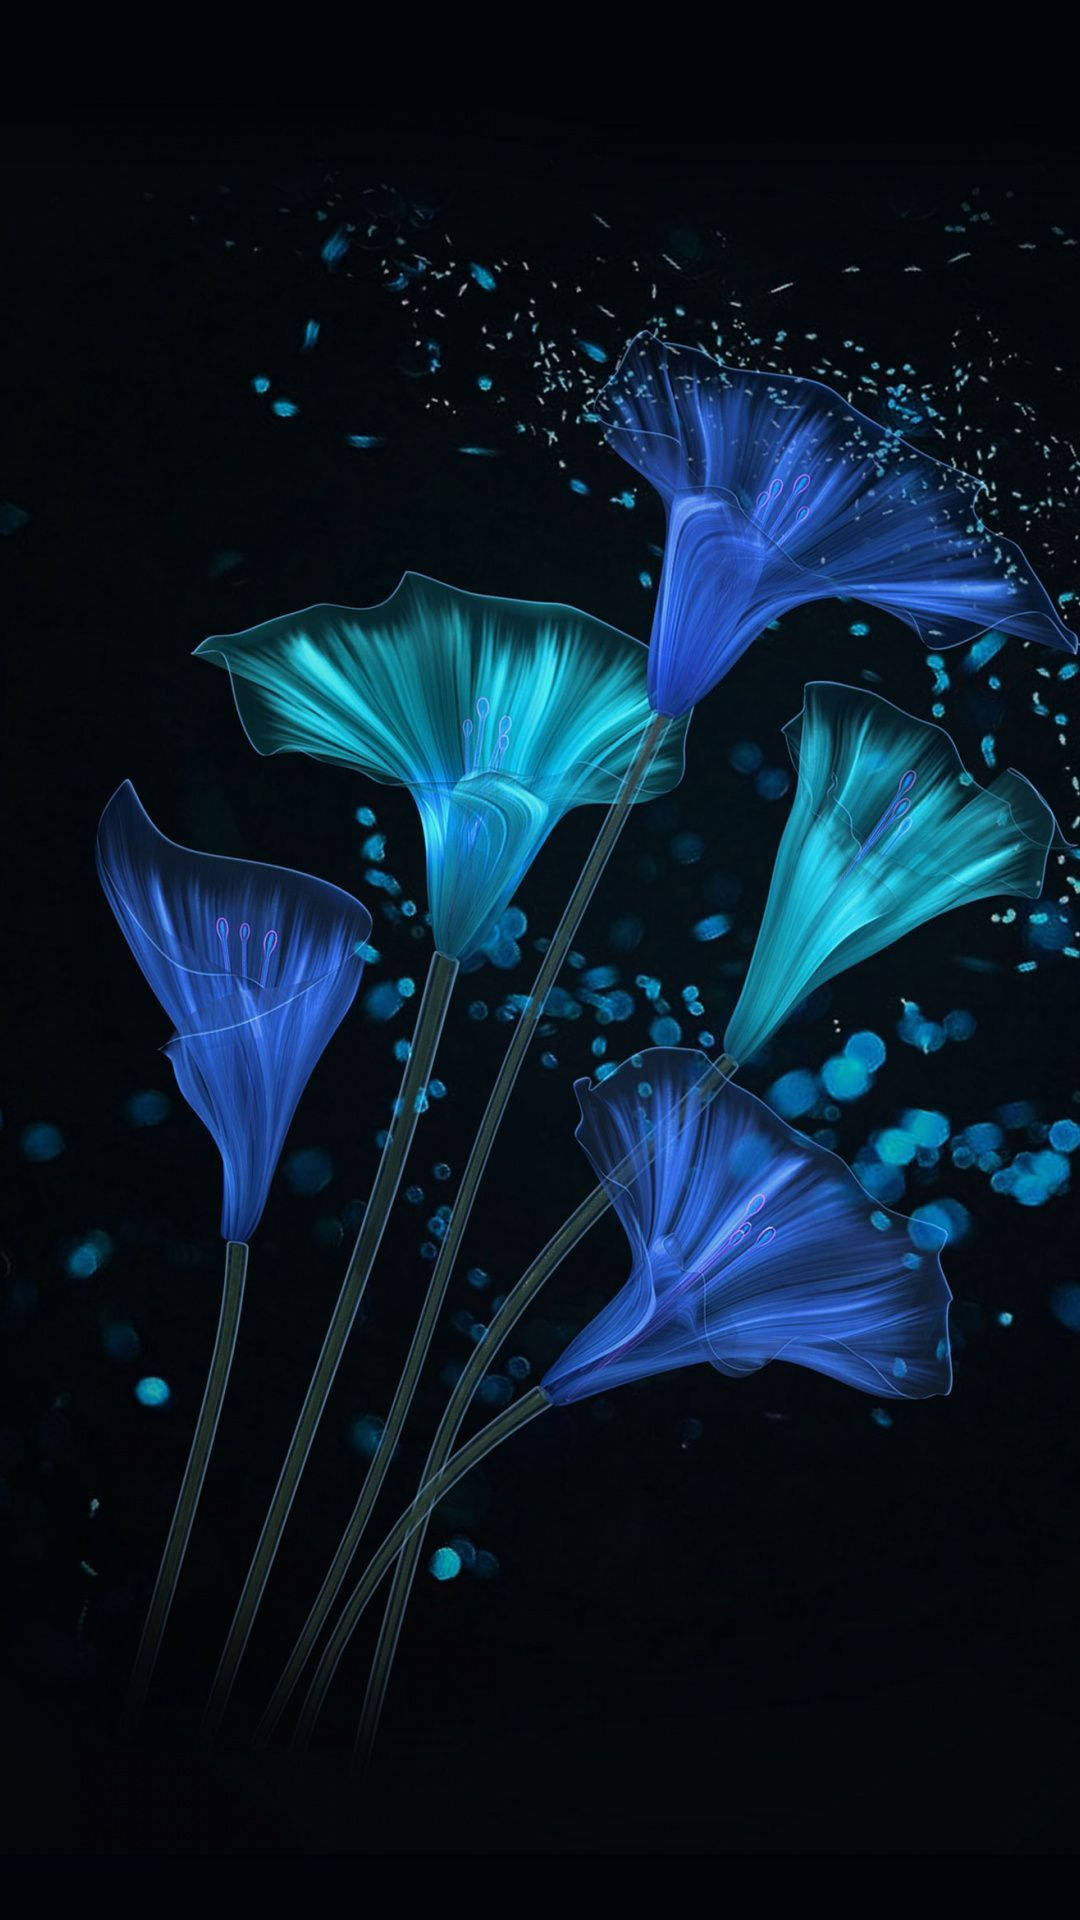 Beauteous Dark Teal Blossom for iPhone Wallpaper